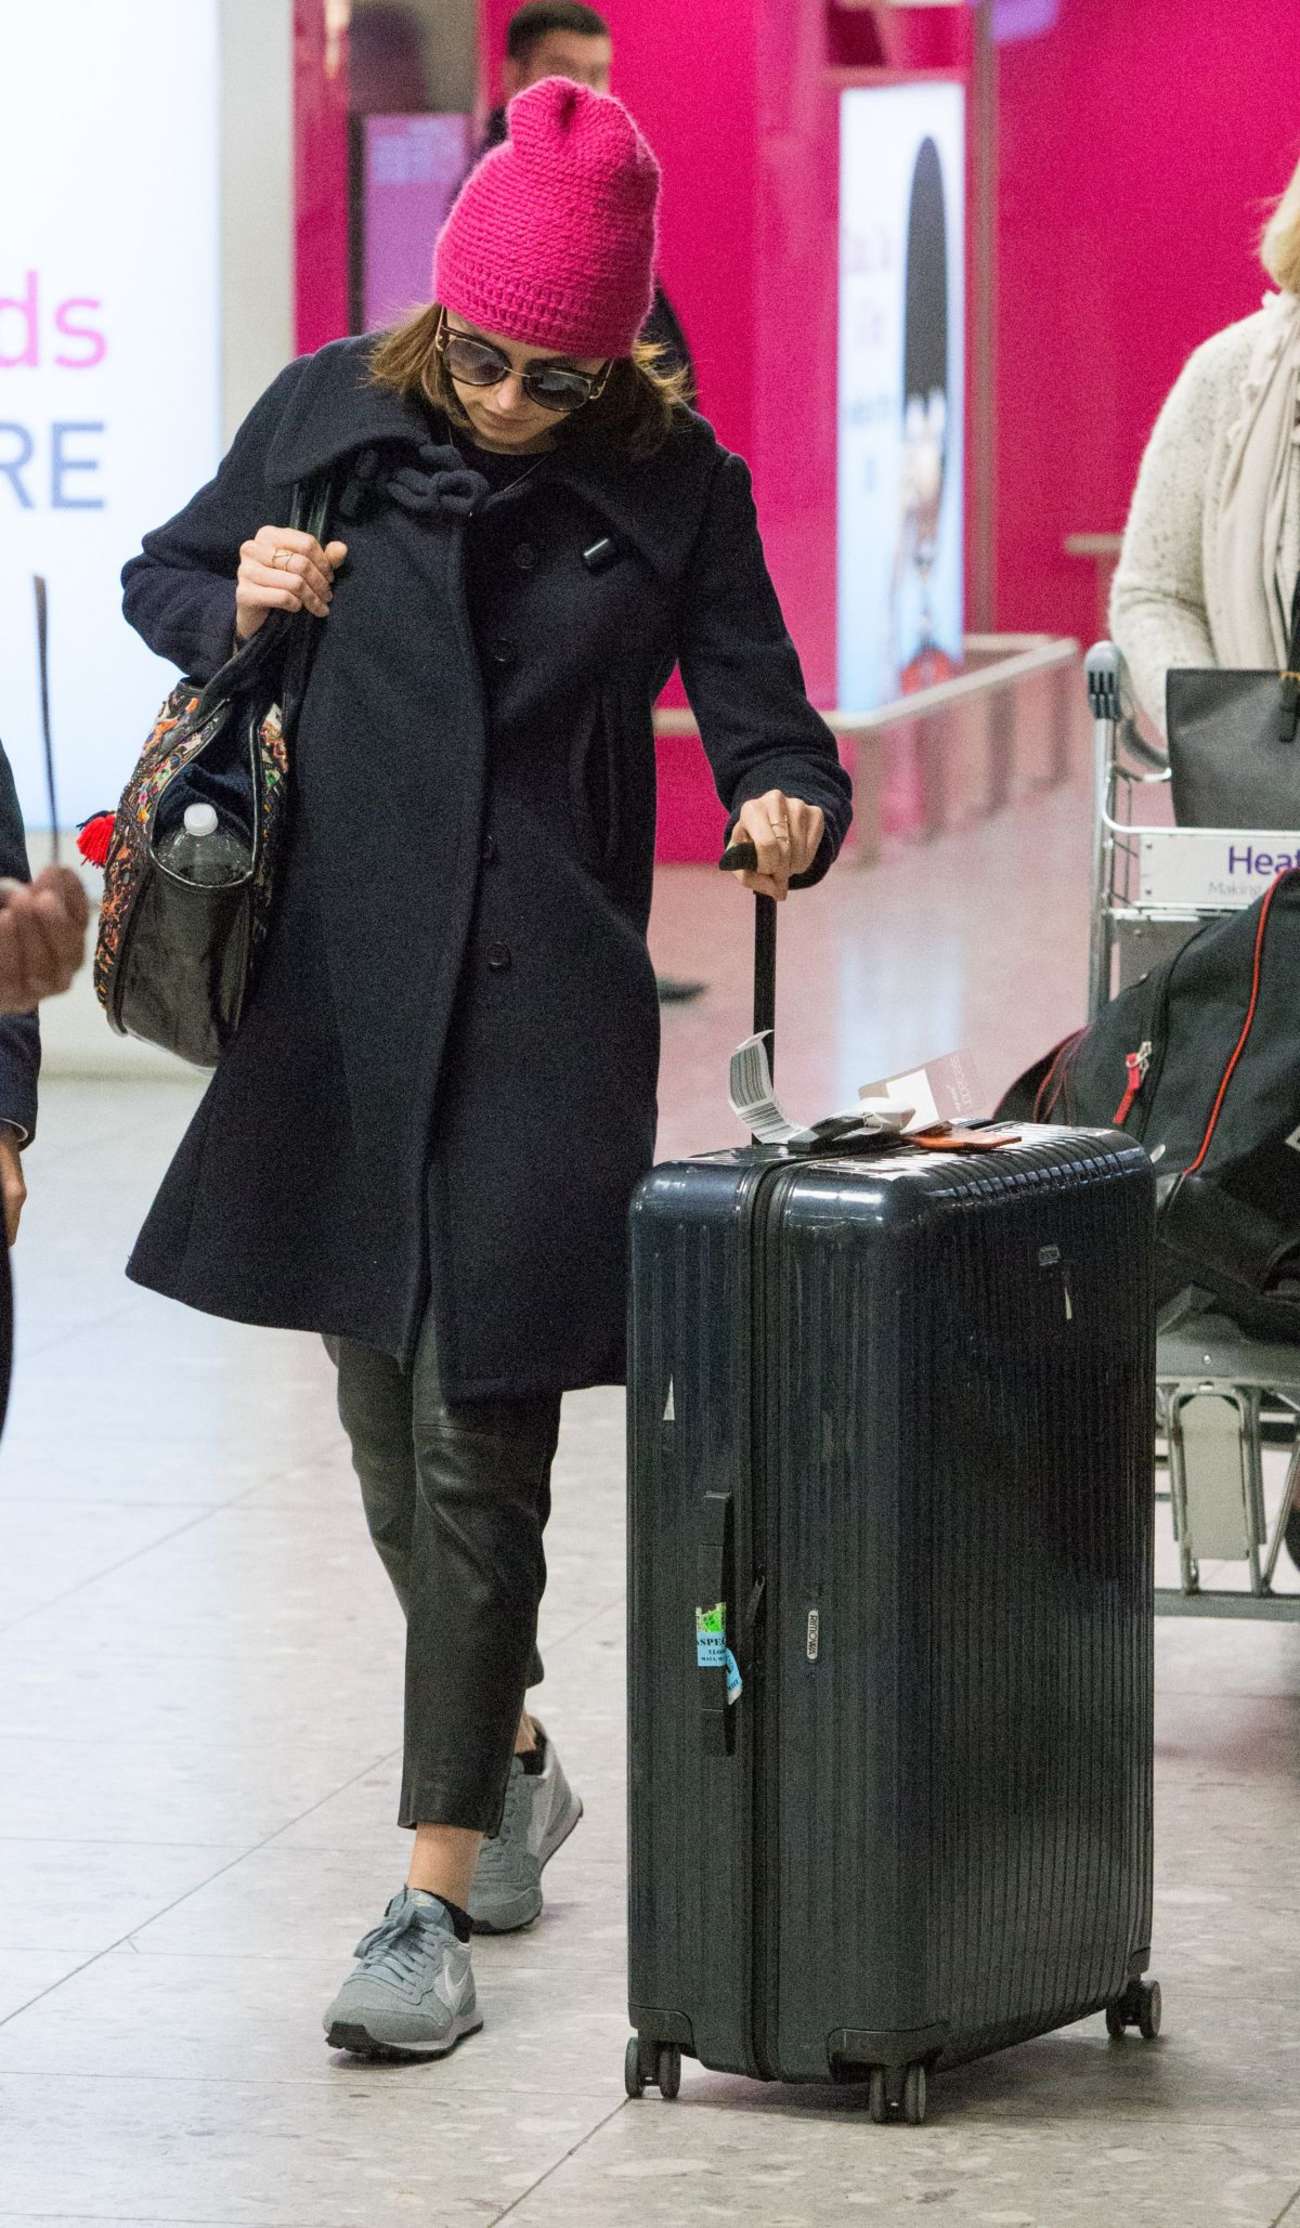 Daisy Ridley in Leathe at Heathrow Airport in London